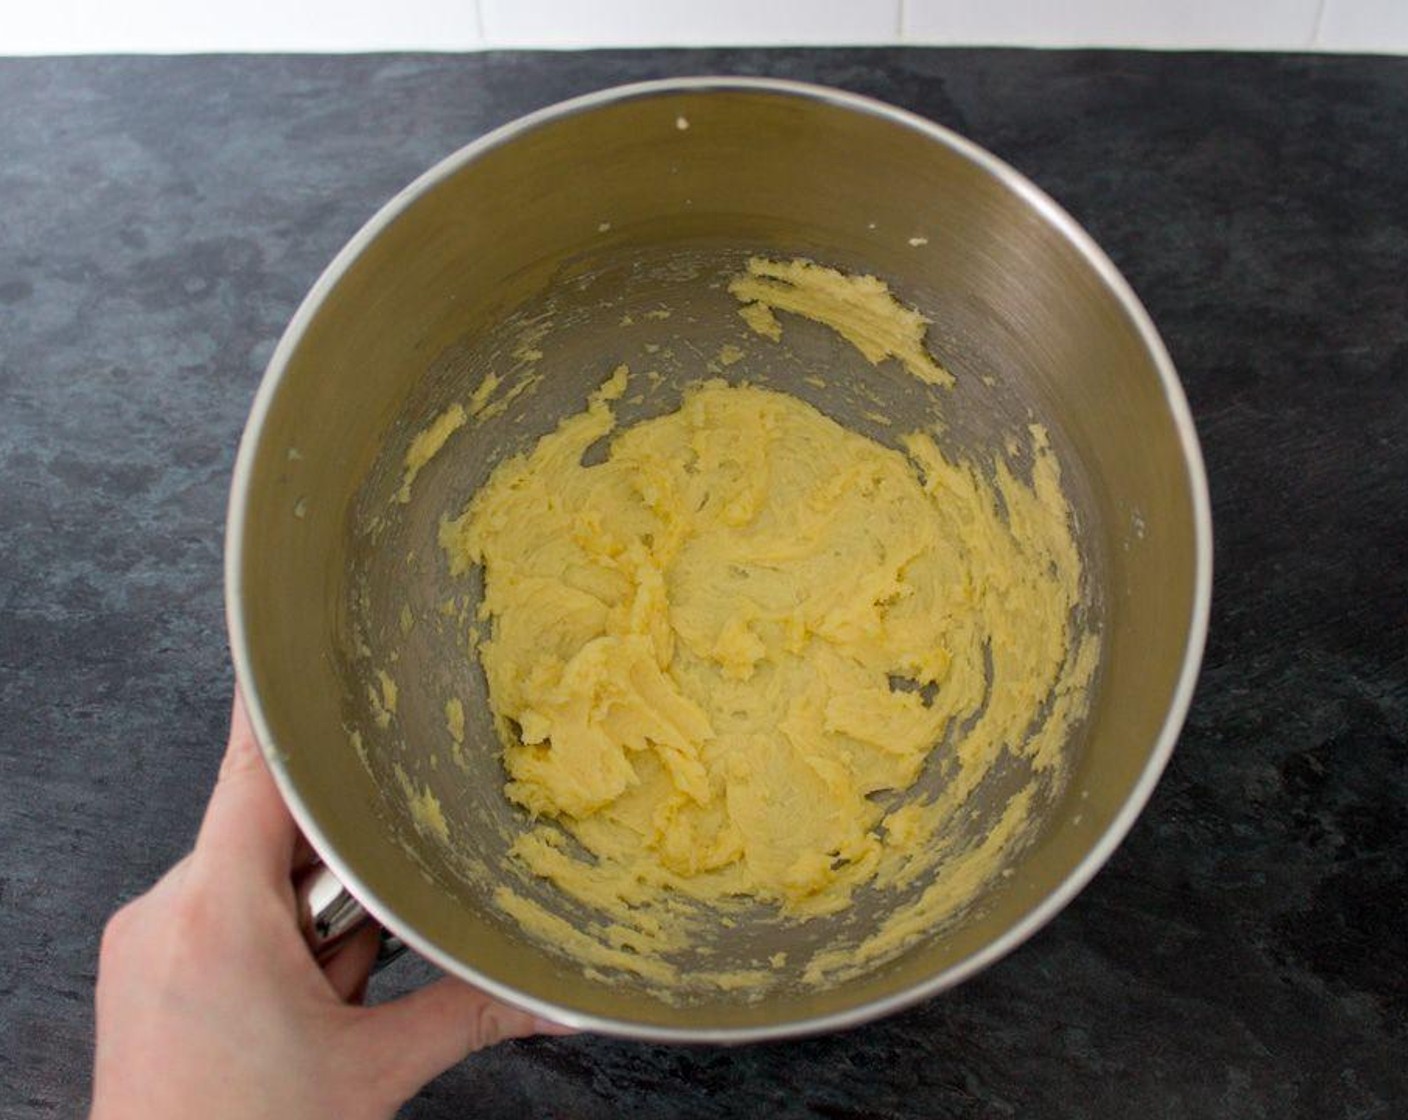 step 2 Either in a stand mixer or a large bowl using an electric hand whisk, cream together the Unsalted Butter (1/2 cup) and Golden Caster Sugar (3 1/2 Tbsp) until light and fluffy.